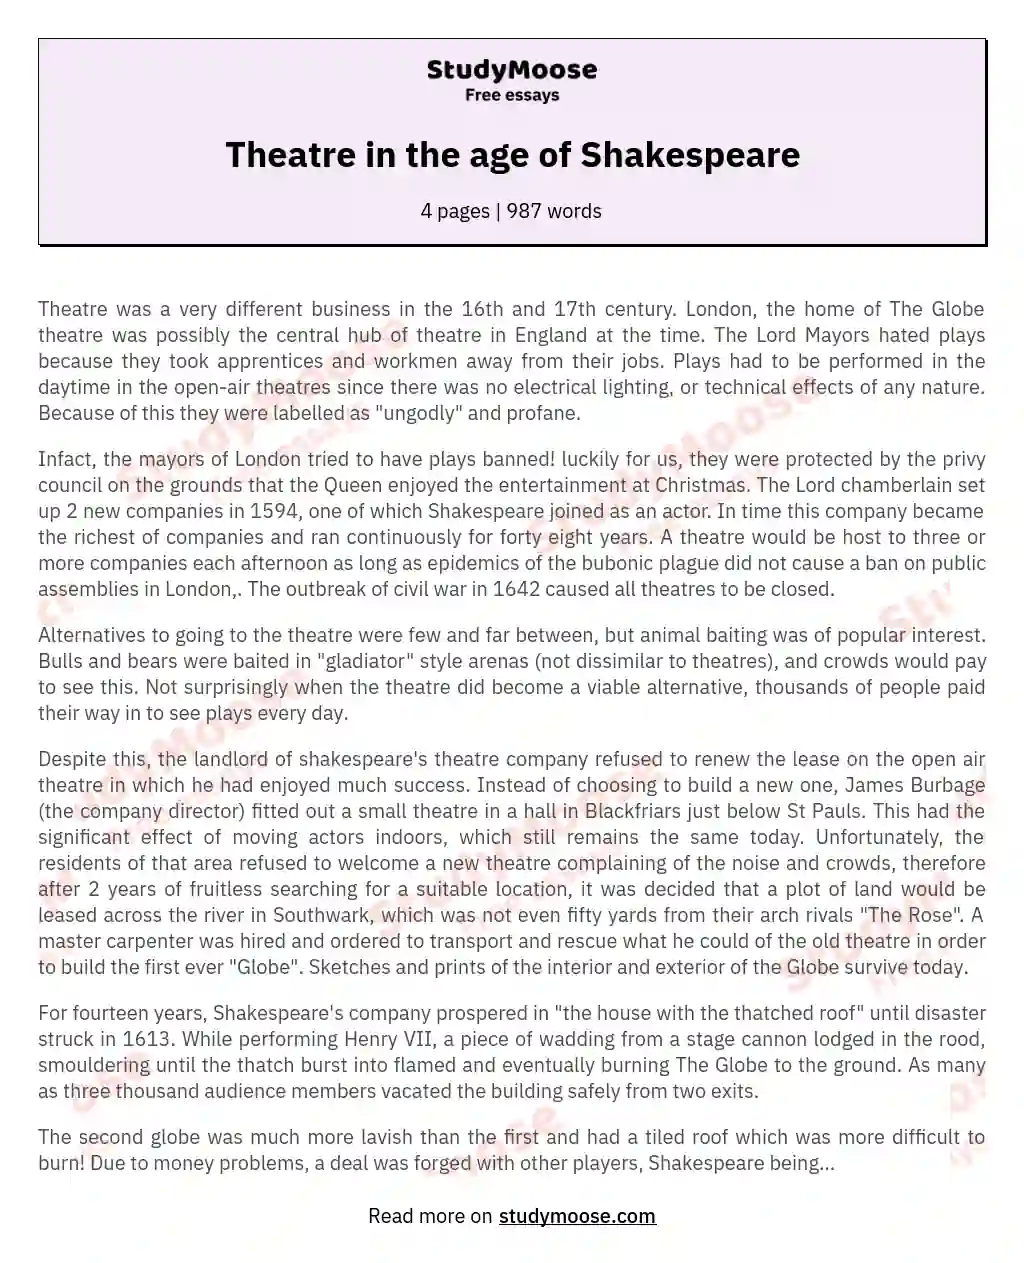 Theatre in the age of Shakespeare essay